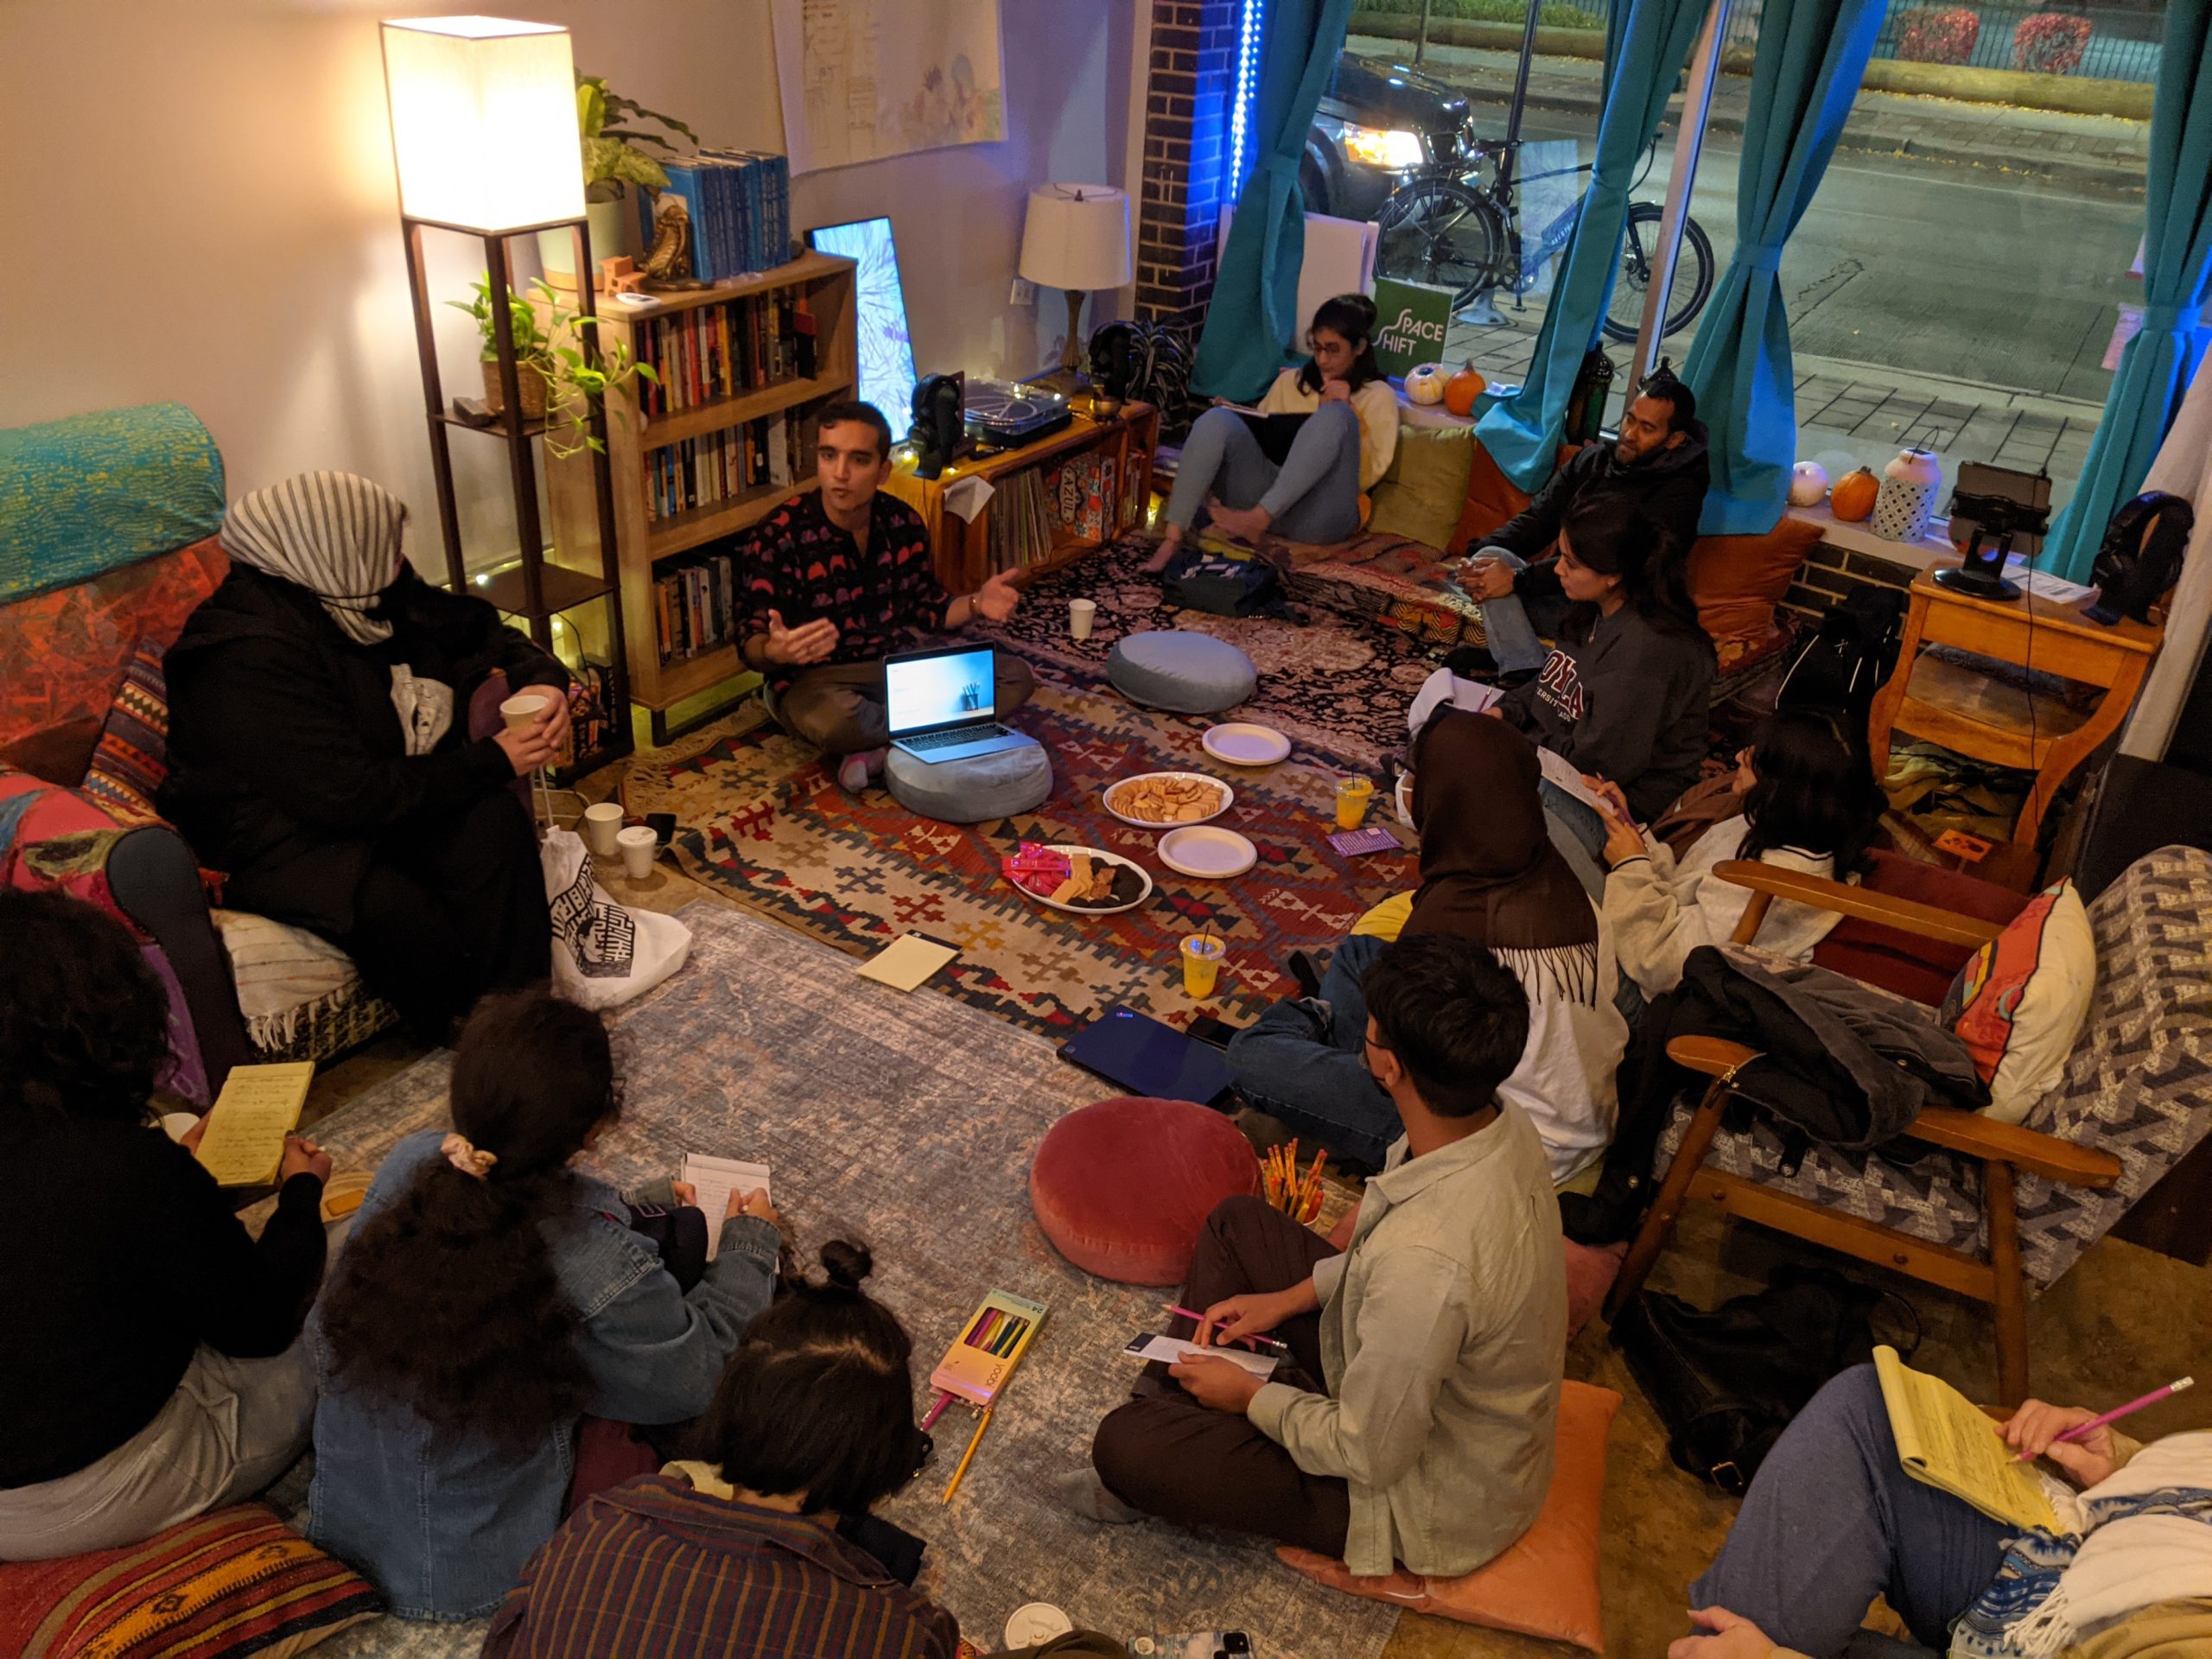 Image: Community members gather in Starlight’s storefront space for a storytelling workshop. People with notepads and pencils sit on various rugs in an ambiently-lit storefront. There are snacks and drinks on the rugs in the center of the room. Courtesy of the SpaceShift Collective.